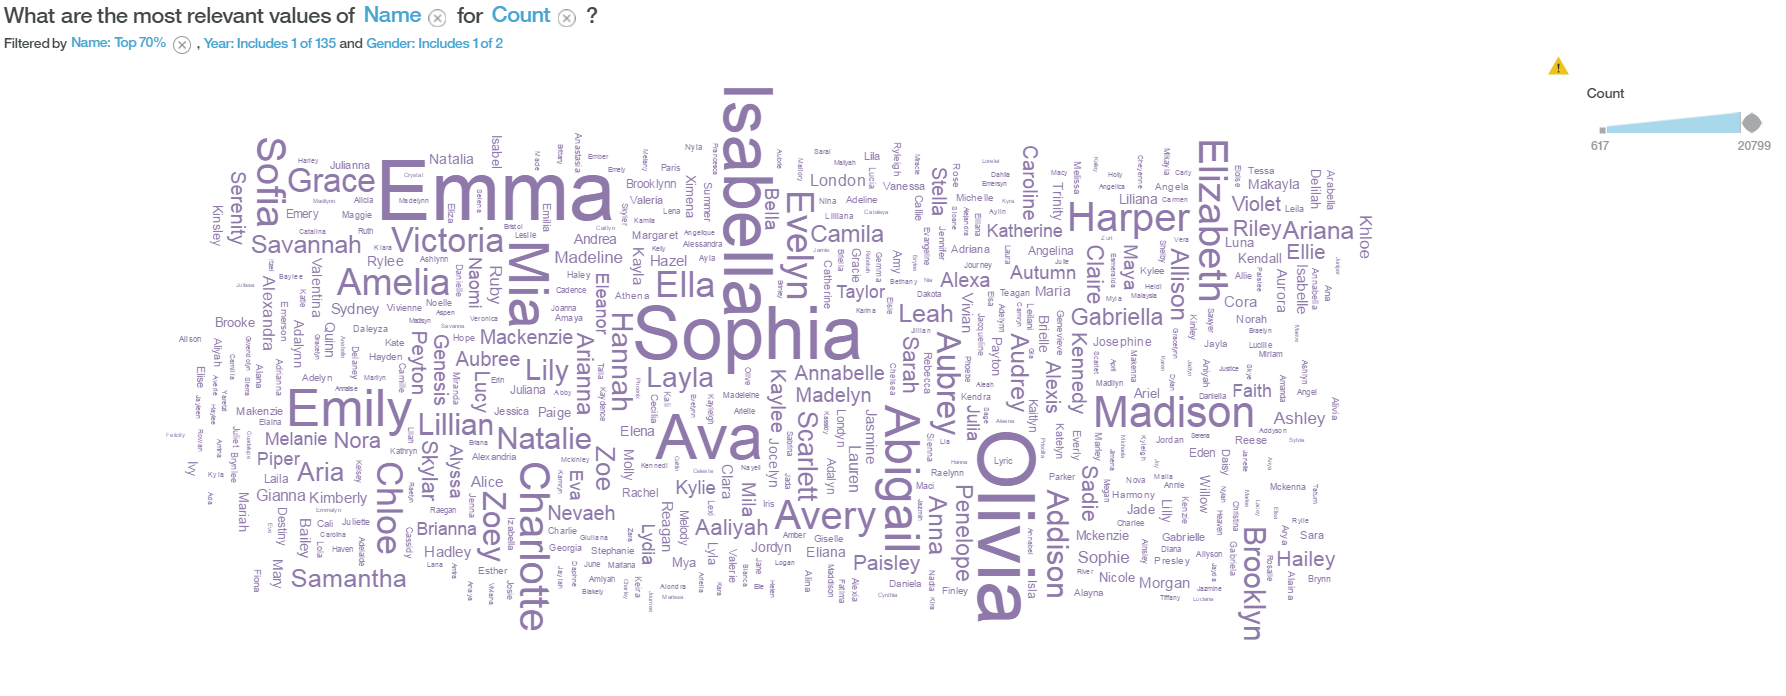 Word cloud of the most popular girl names